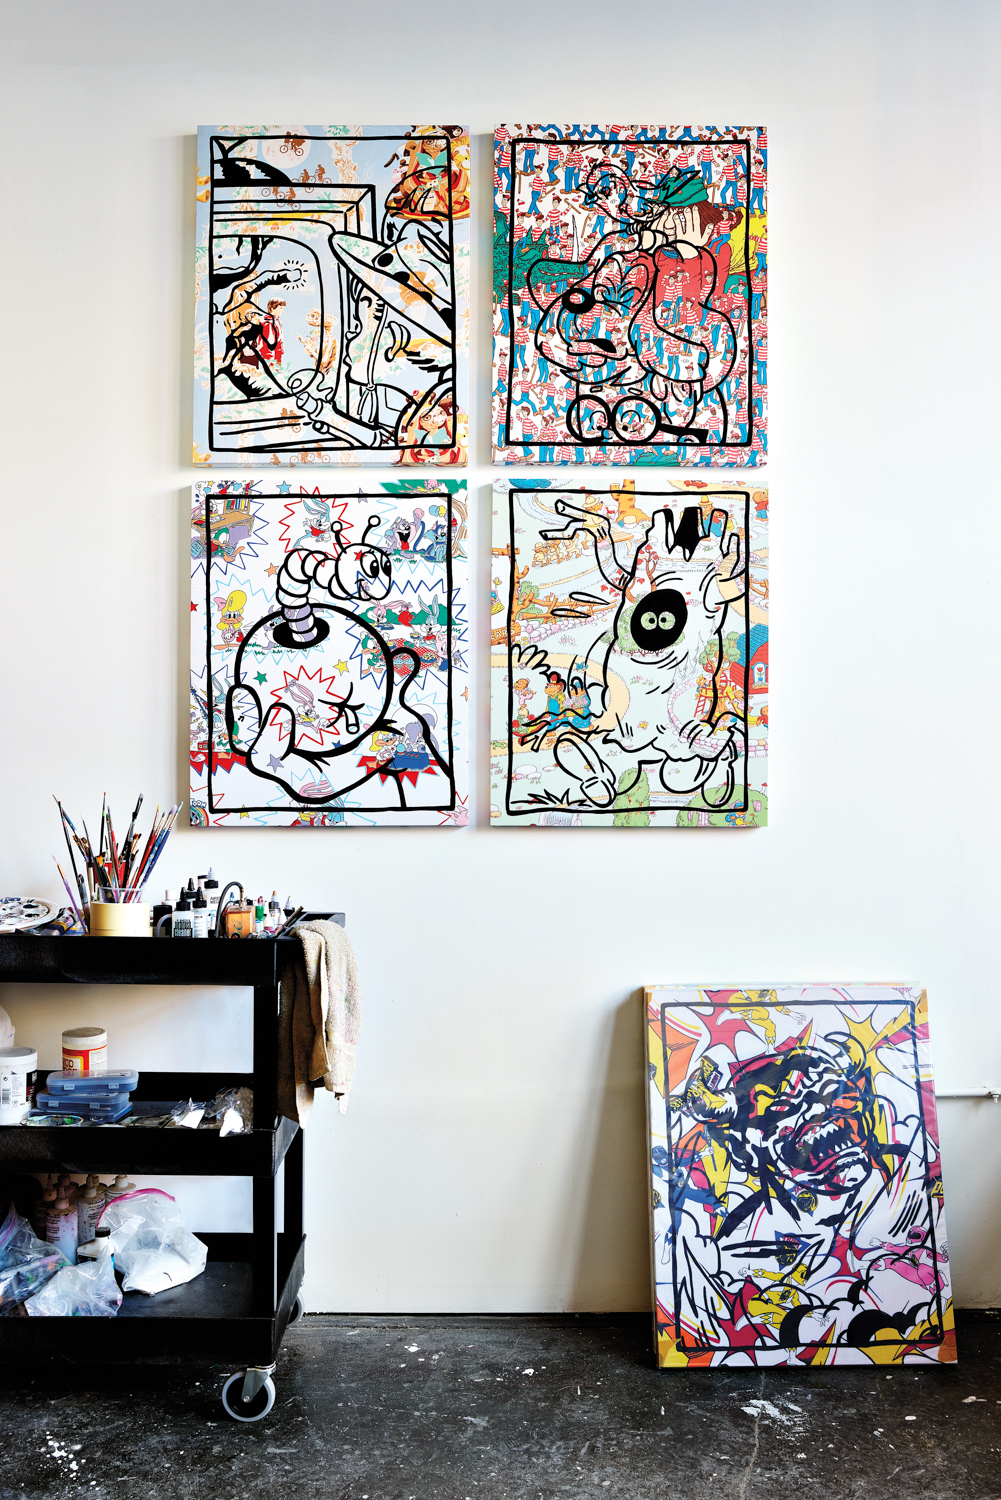 cartoon drawings and paintings hanging on the wall and one on the floor